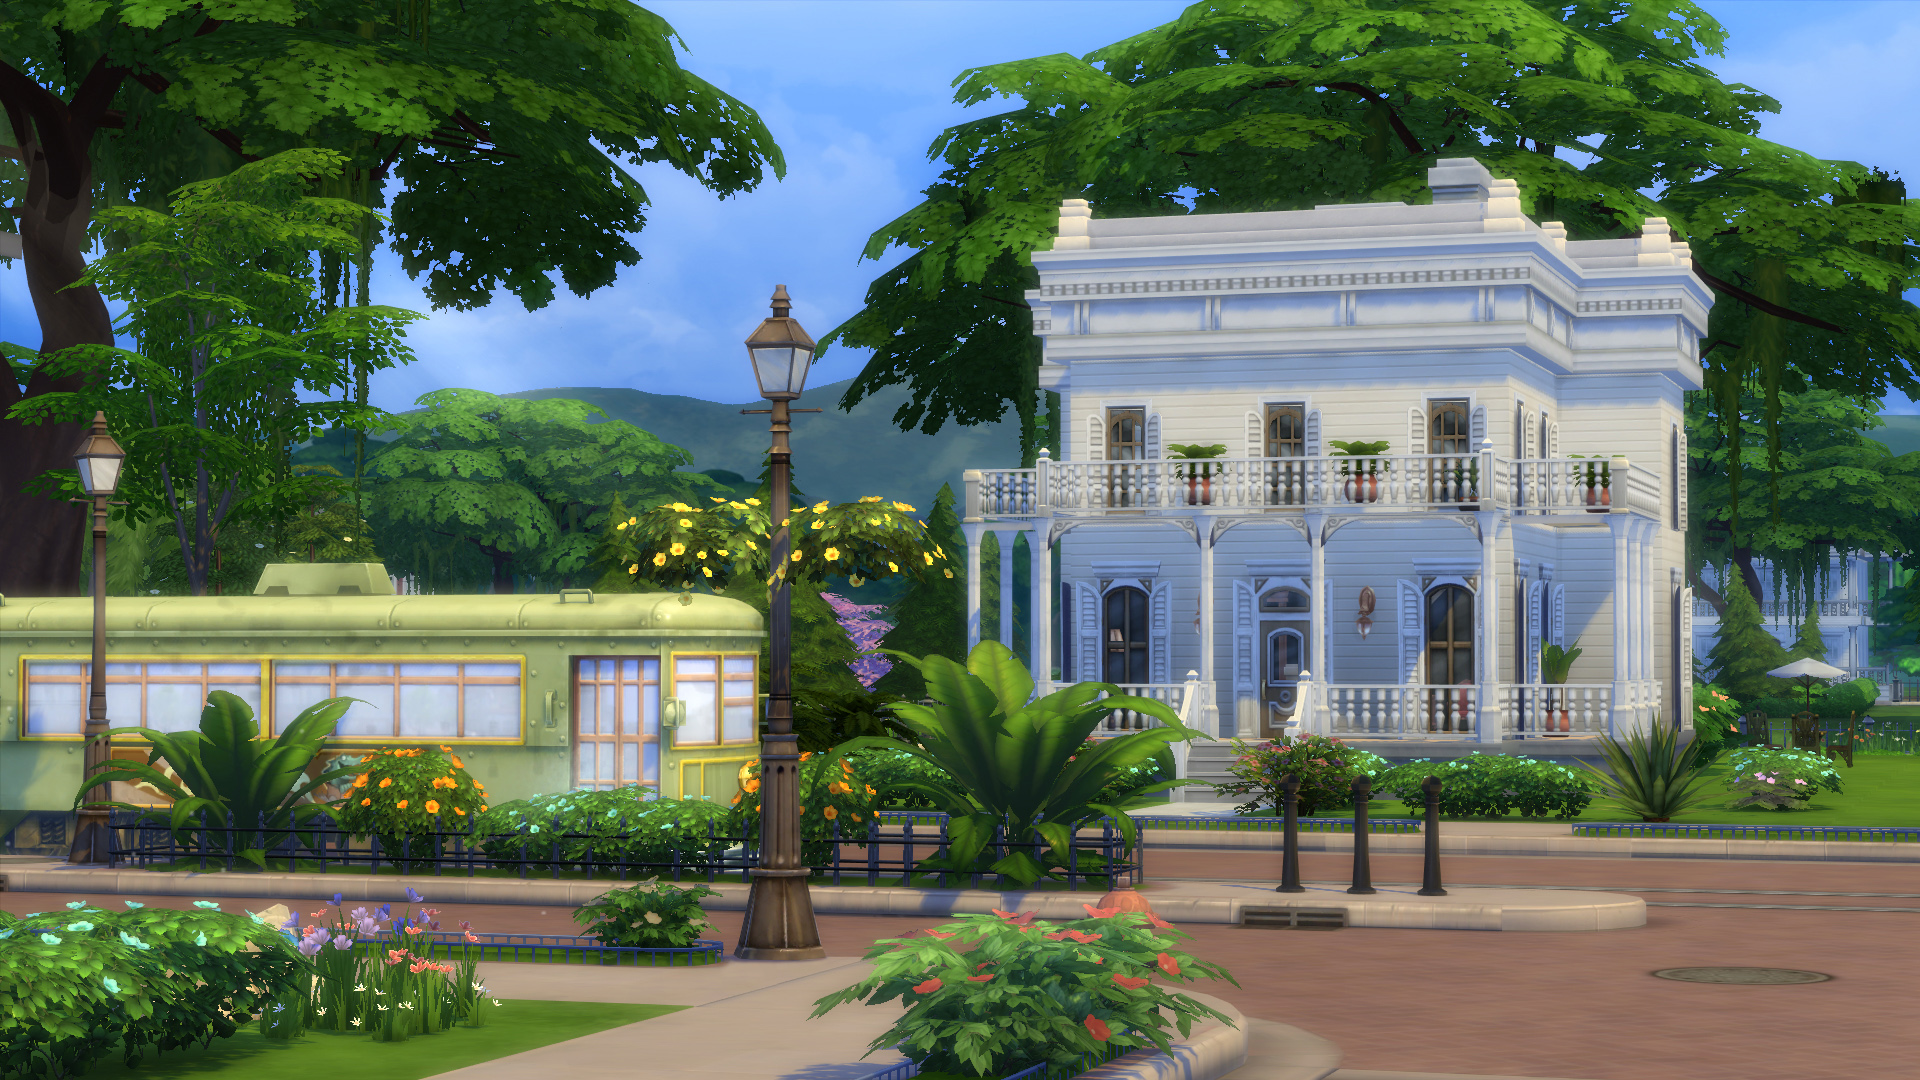 HD desktop wallpaper from The Sims 4 featuring an elegant white mansion with lush gardens and a serene park setting.